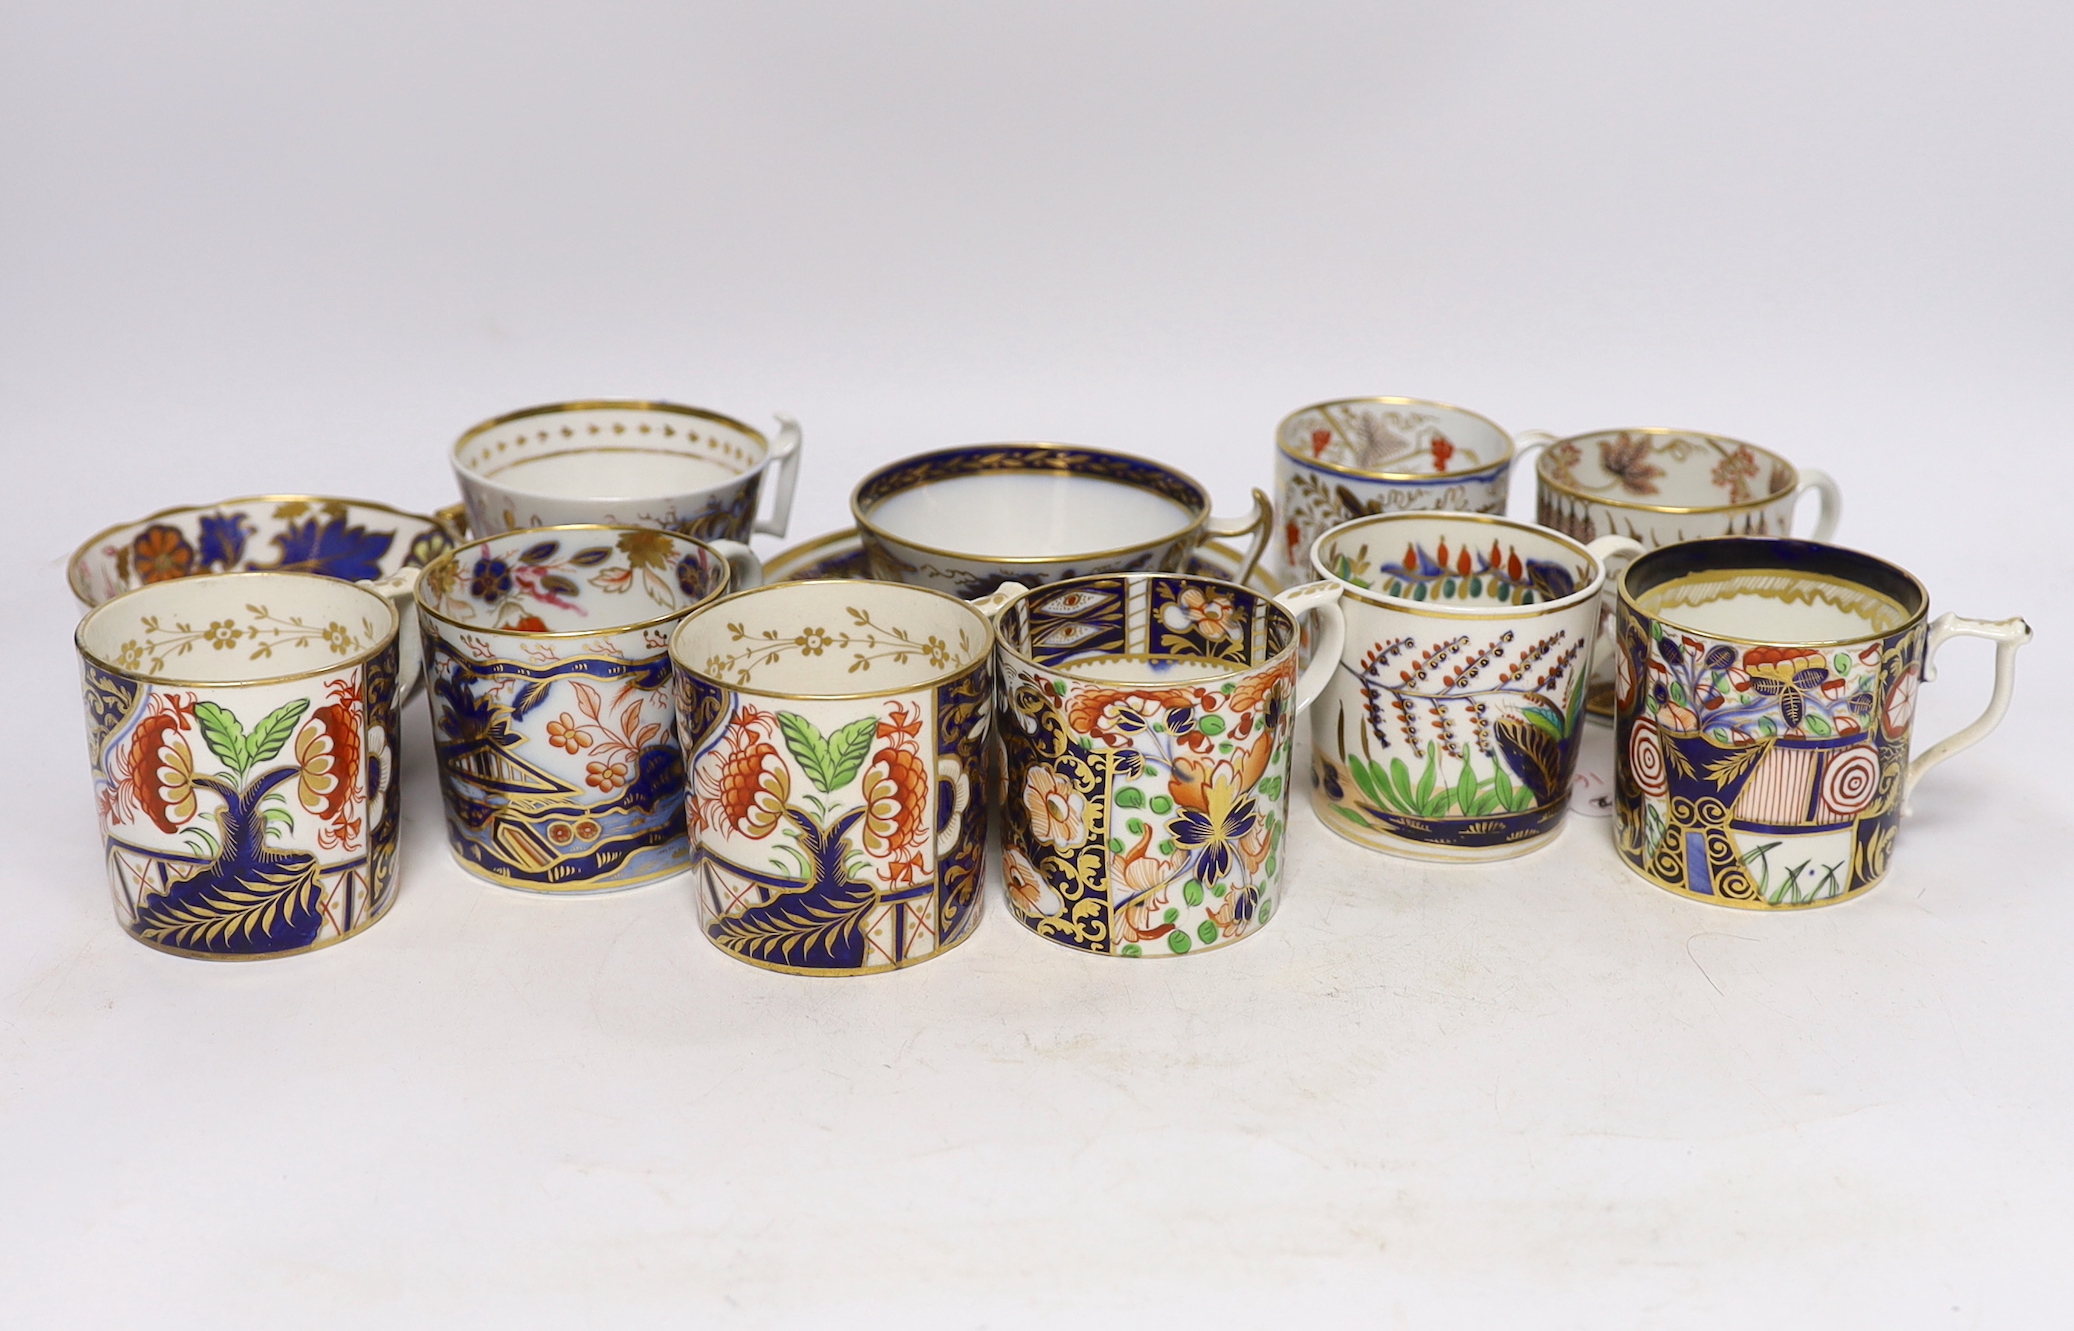 Eleven 1800-1820 English porcelain coffee cans and tea cups, including Imari pattern examples, one with matching saucer                                                                                                     